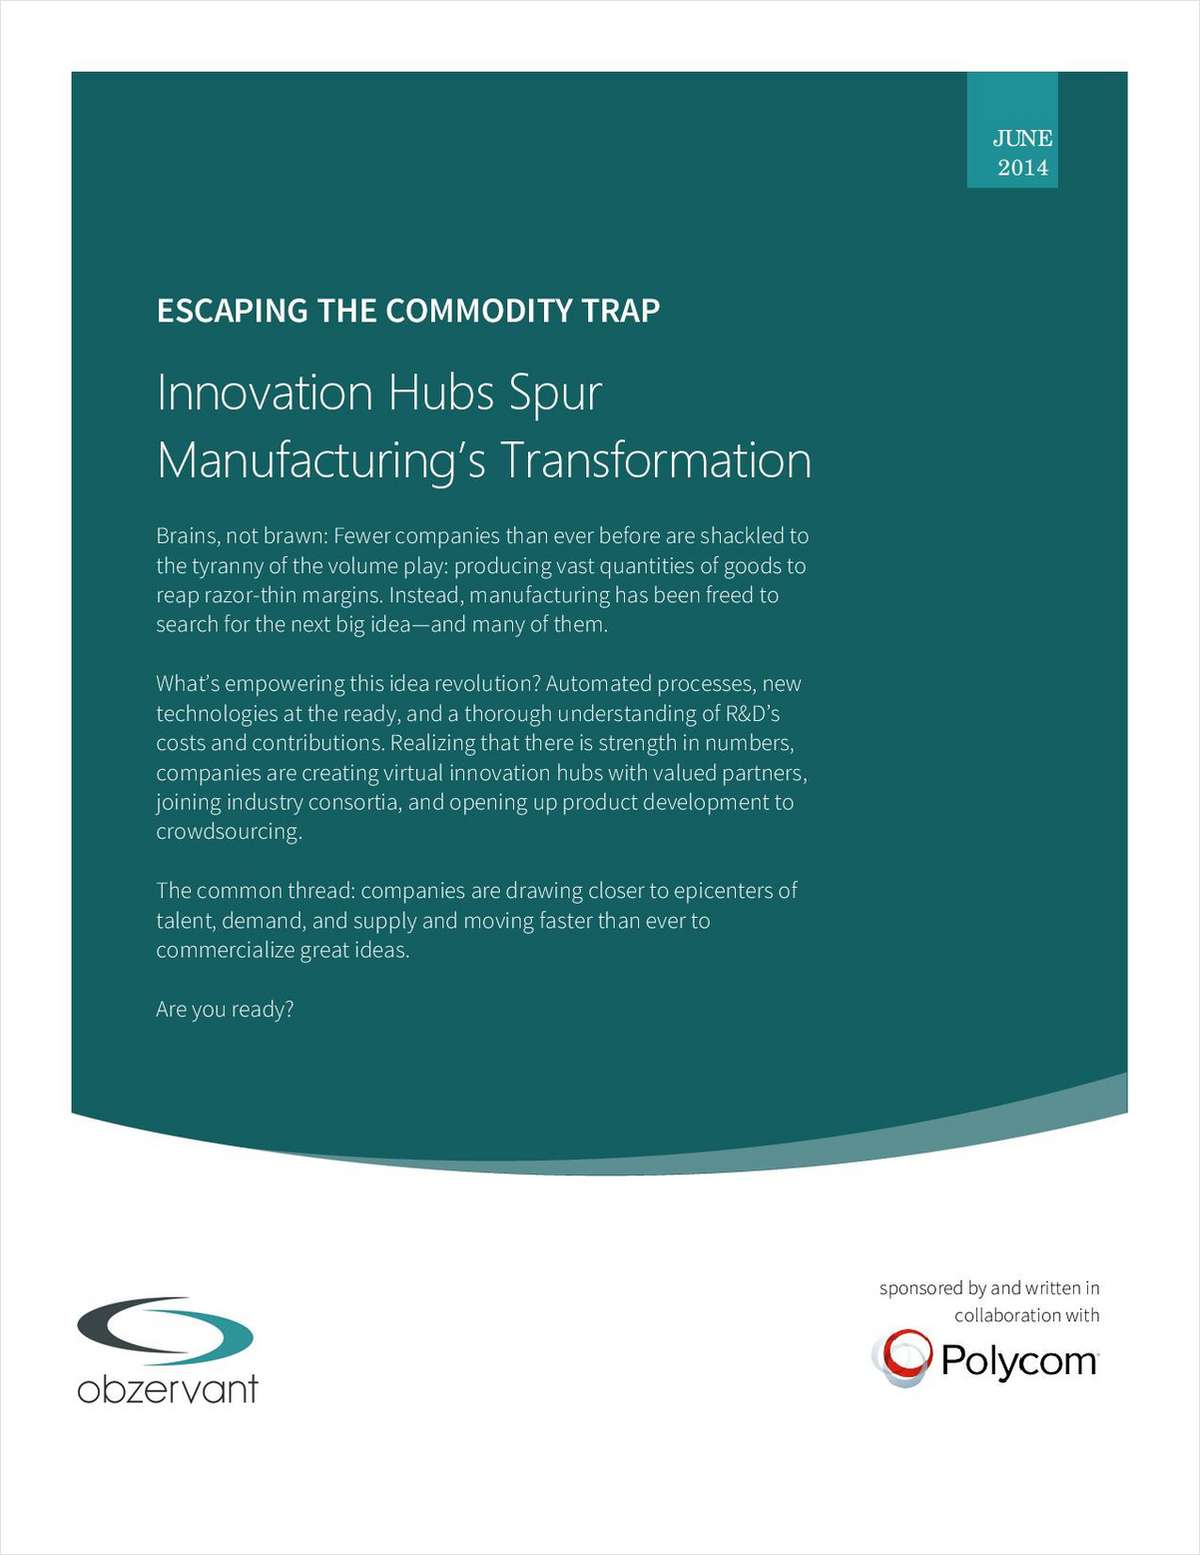 Escaping the Commodity Trap: Innovation Hubs Spur Manufacturing's Transformation